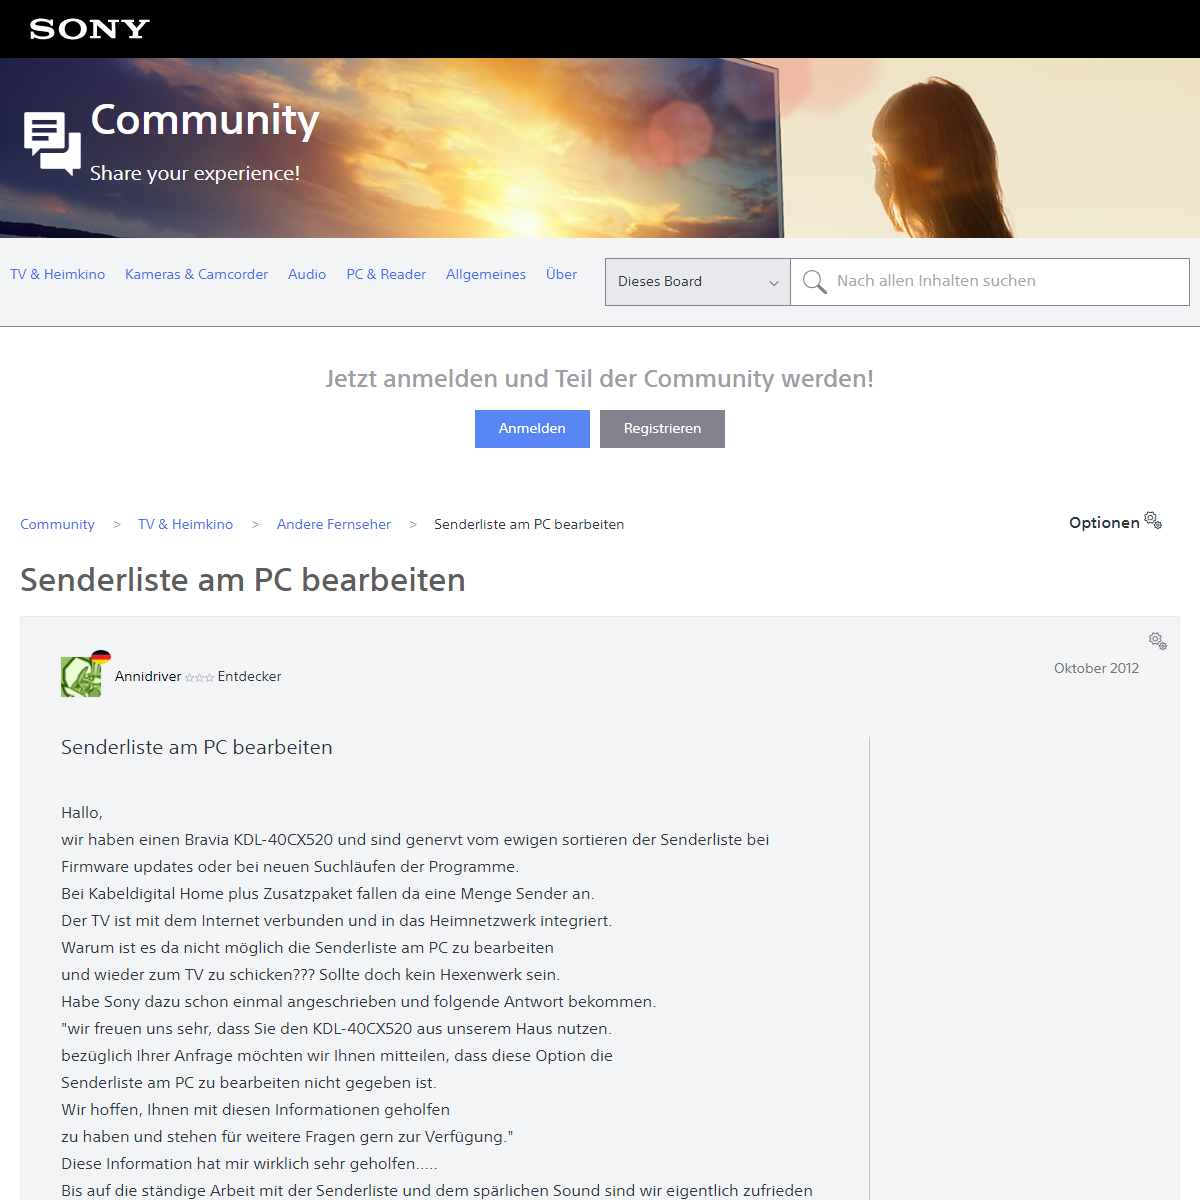 A complete backup of https://community.sony.ch/t5/andere-fernseher/senderliste-am-pc-bearbeiten/td-p/370601